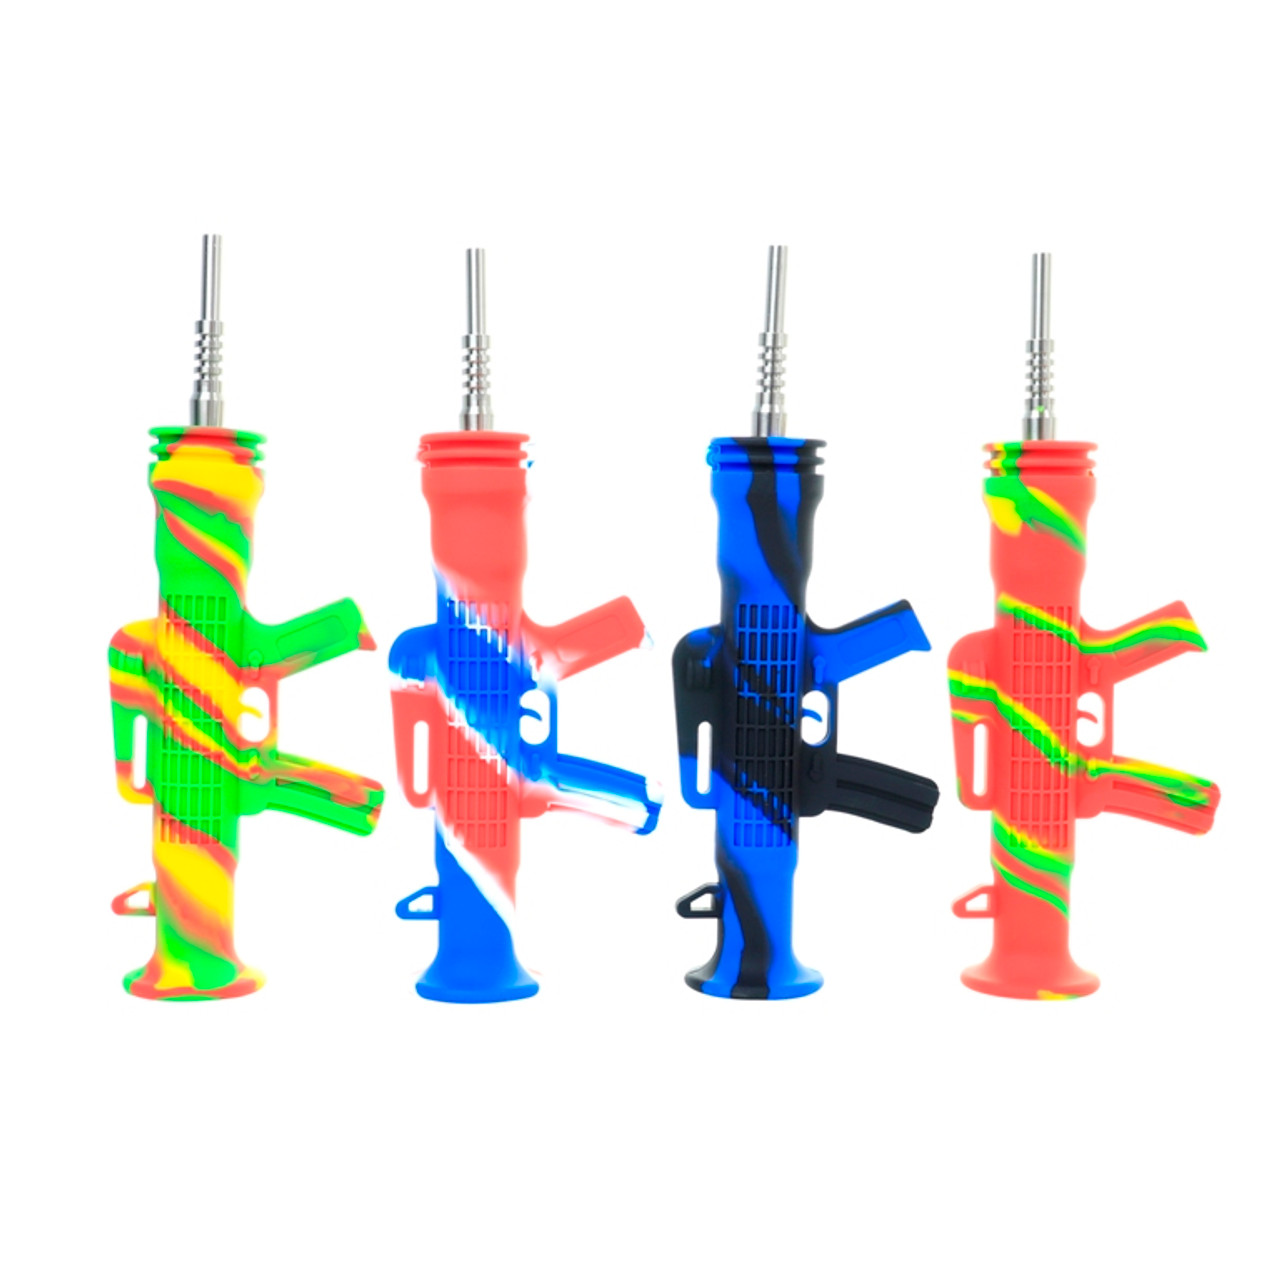 7.5" AK47 Silicone Nectar Collector - Assorted